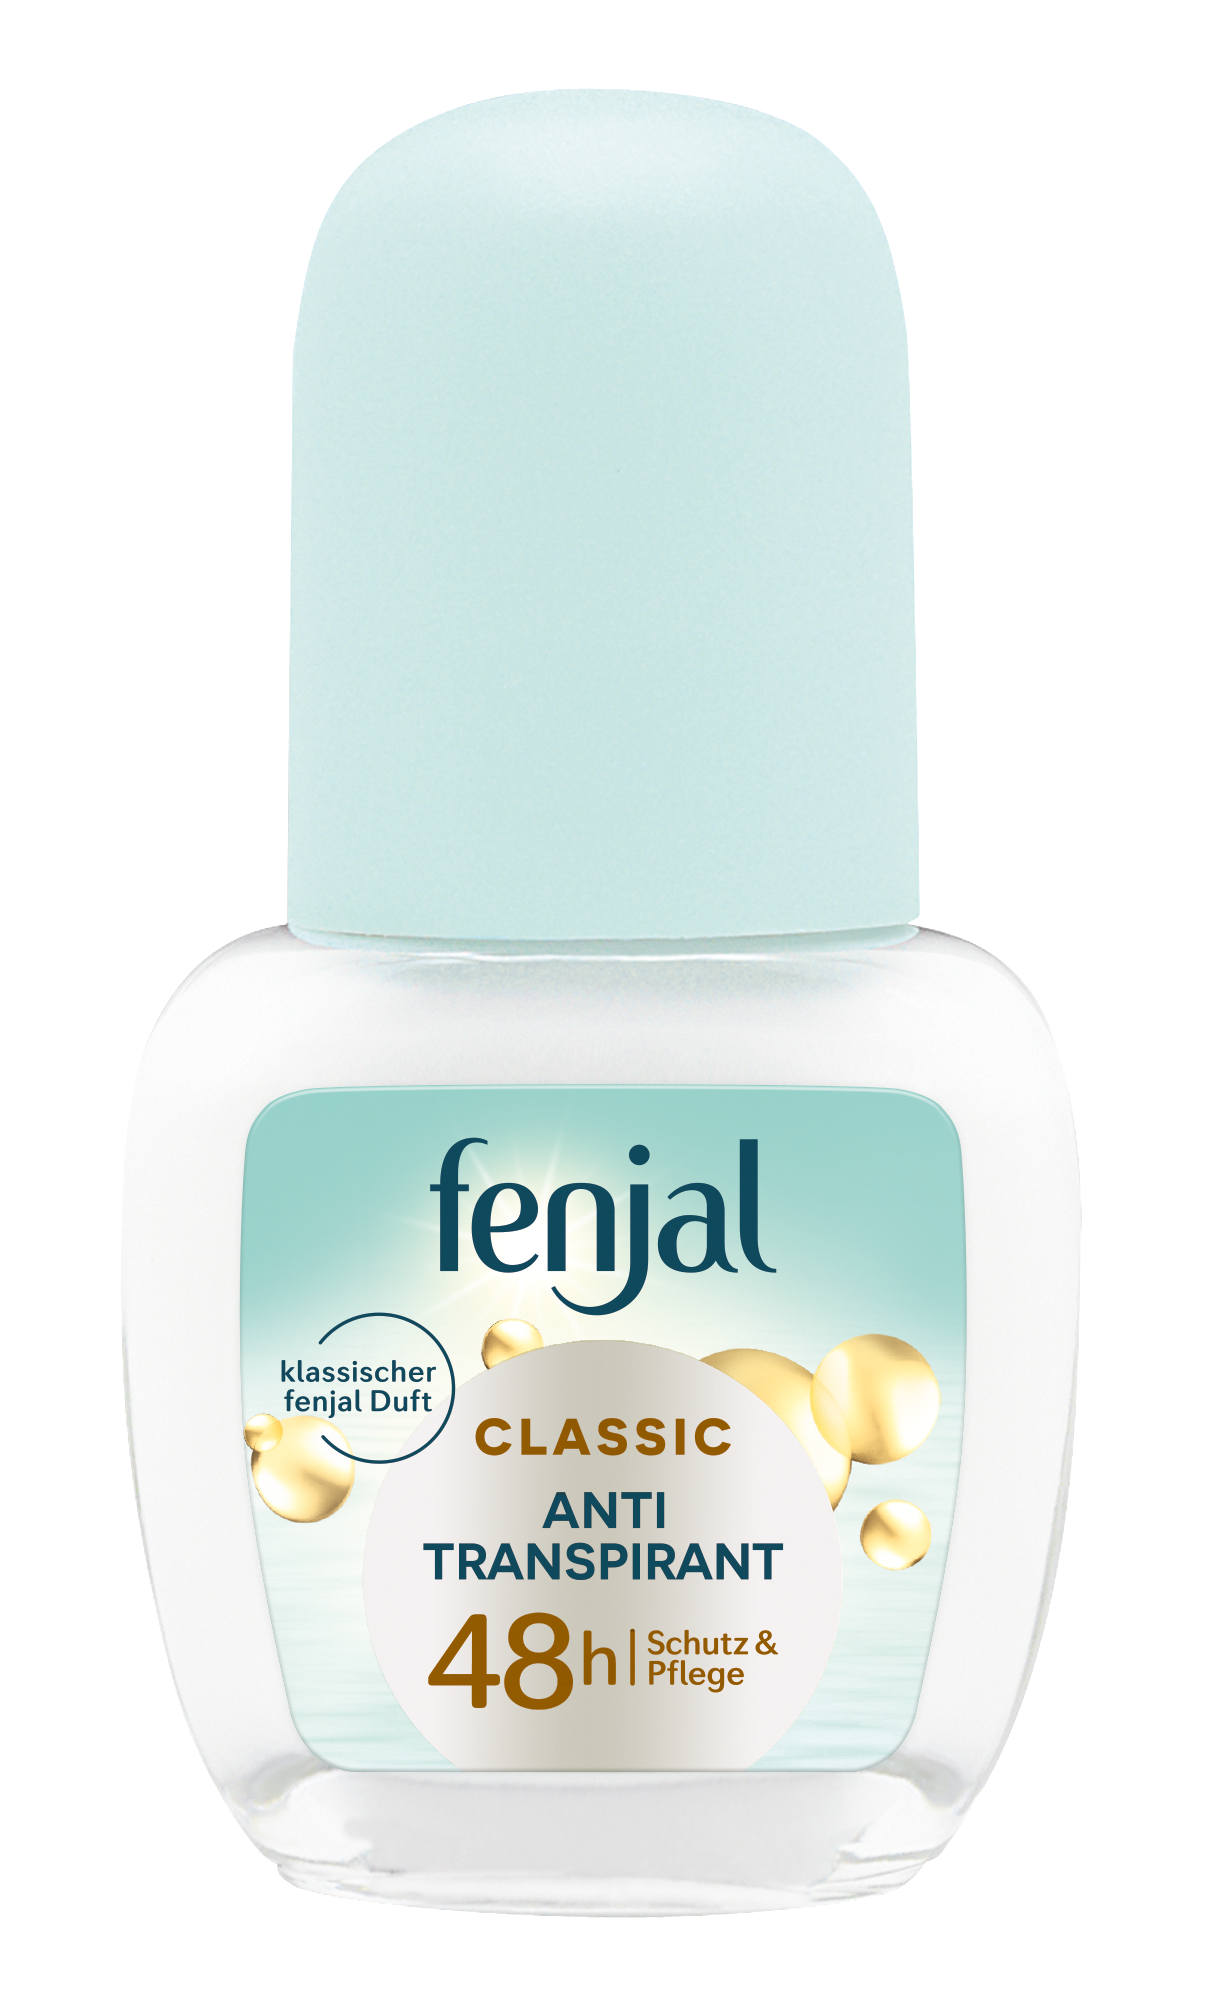 fenjal Creme Roll-On